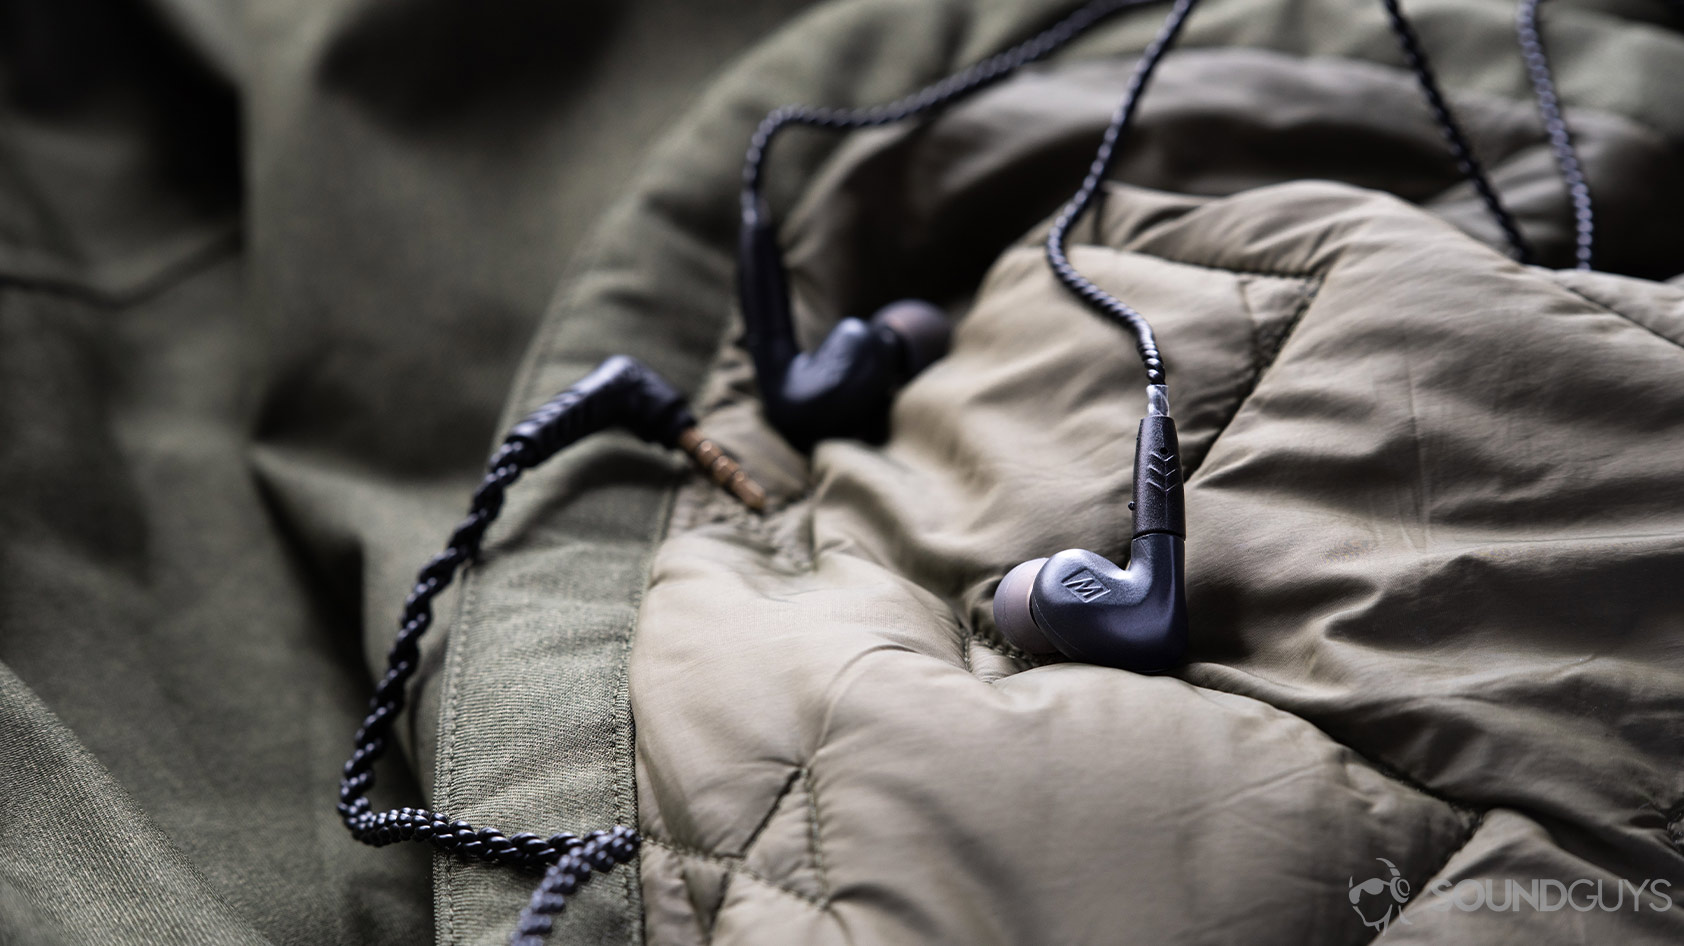 A photo of the Massdrop x MEE audio Pinnacle PX earbuds on a quilted green surface.